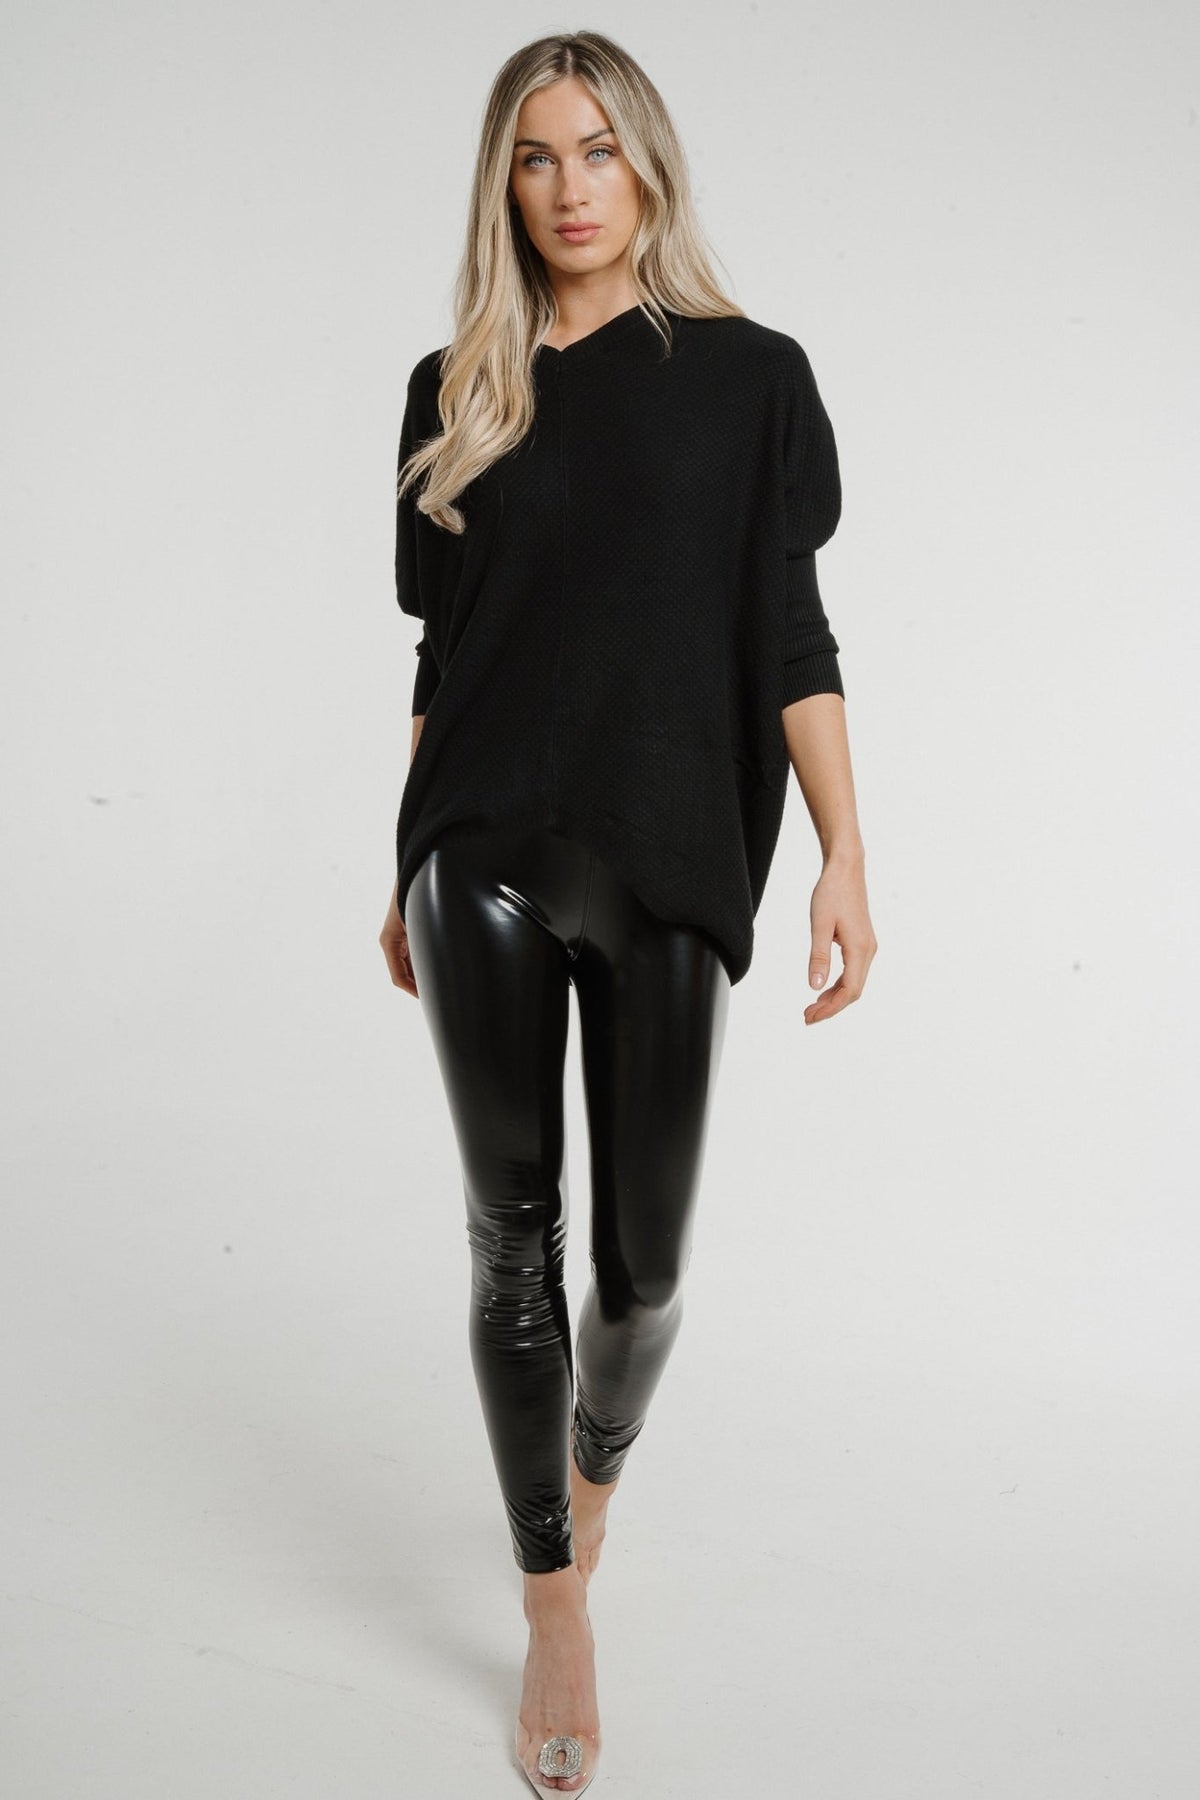 The Wardrobe Fairy - Gals, ordered the Verso Leather leggings as